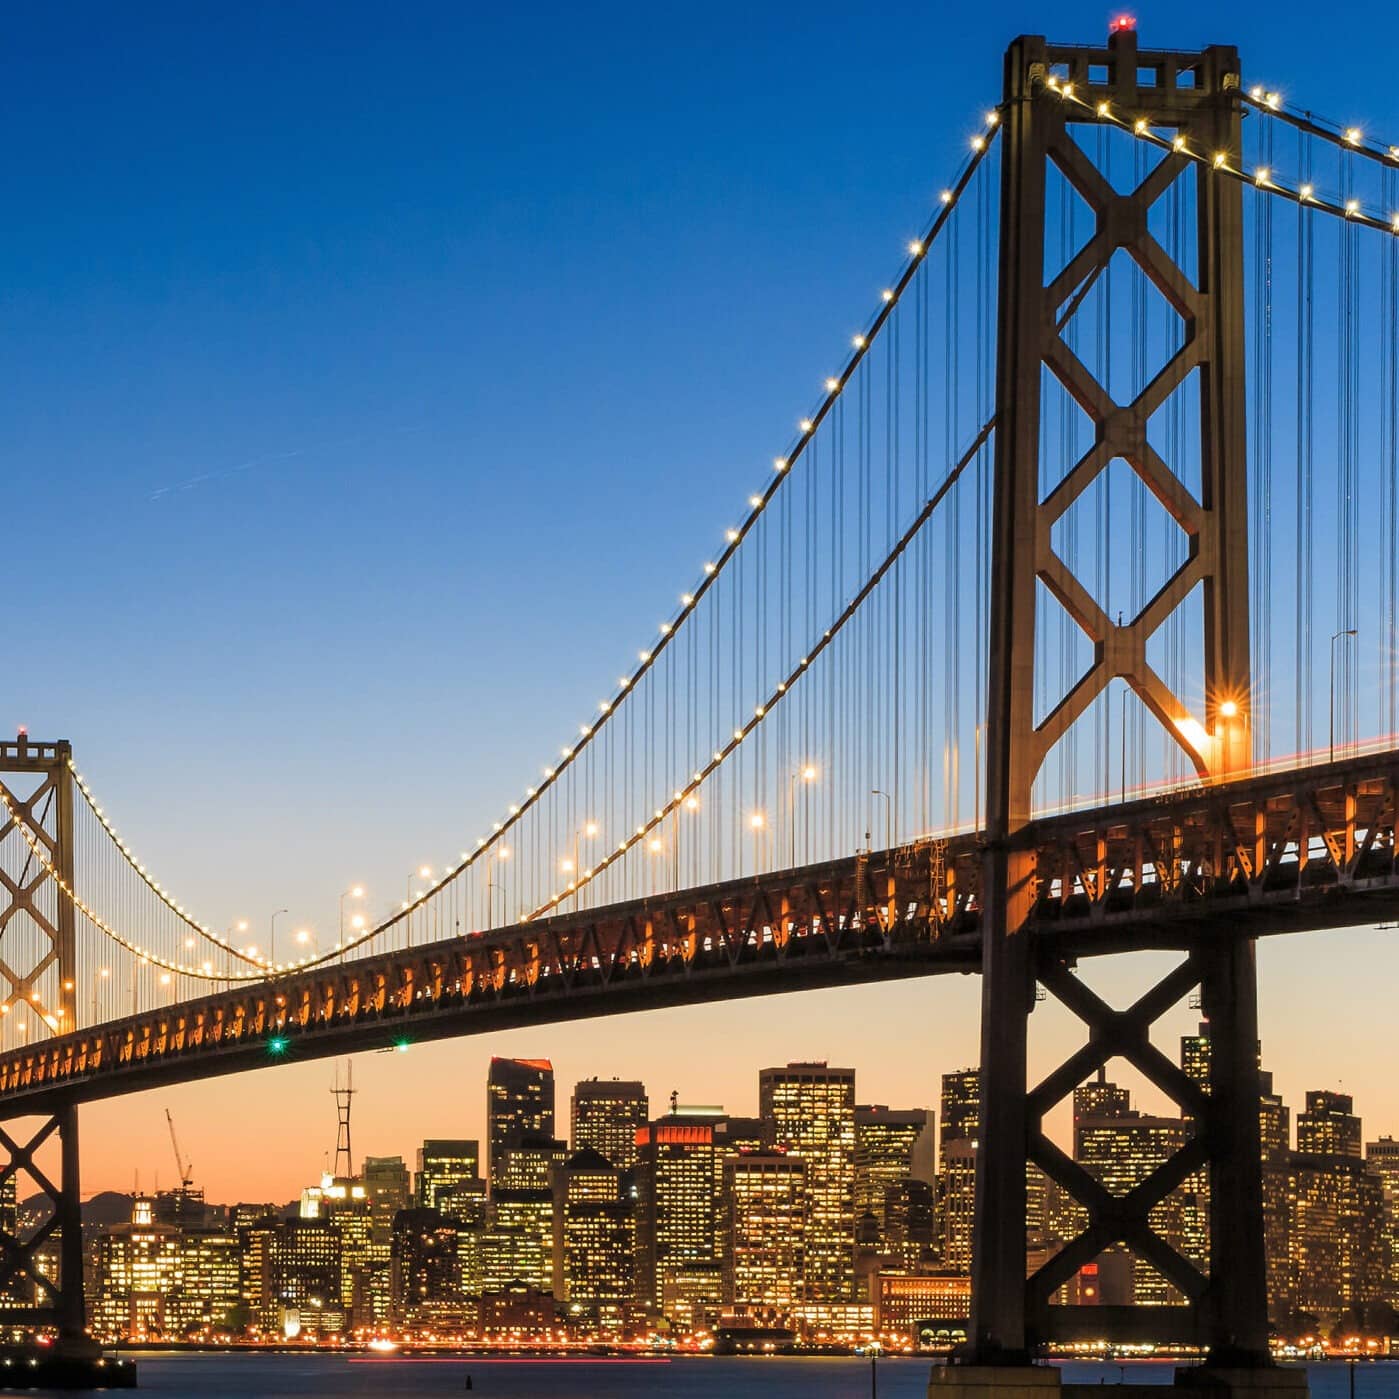 A stock photo of the Golden Gate Bridge, around which MultiPro serves the San Francisco area.